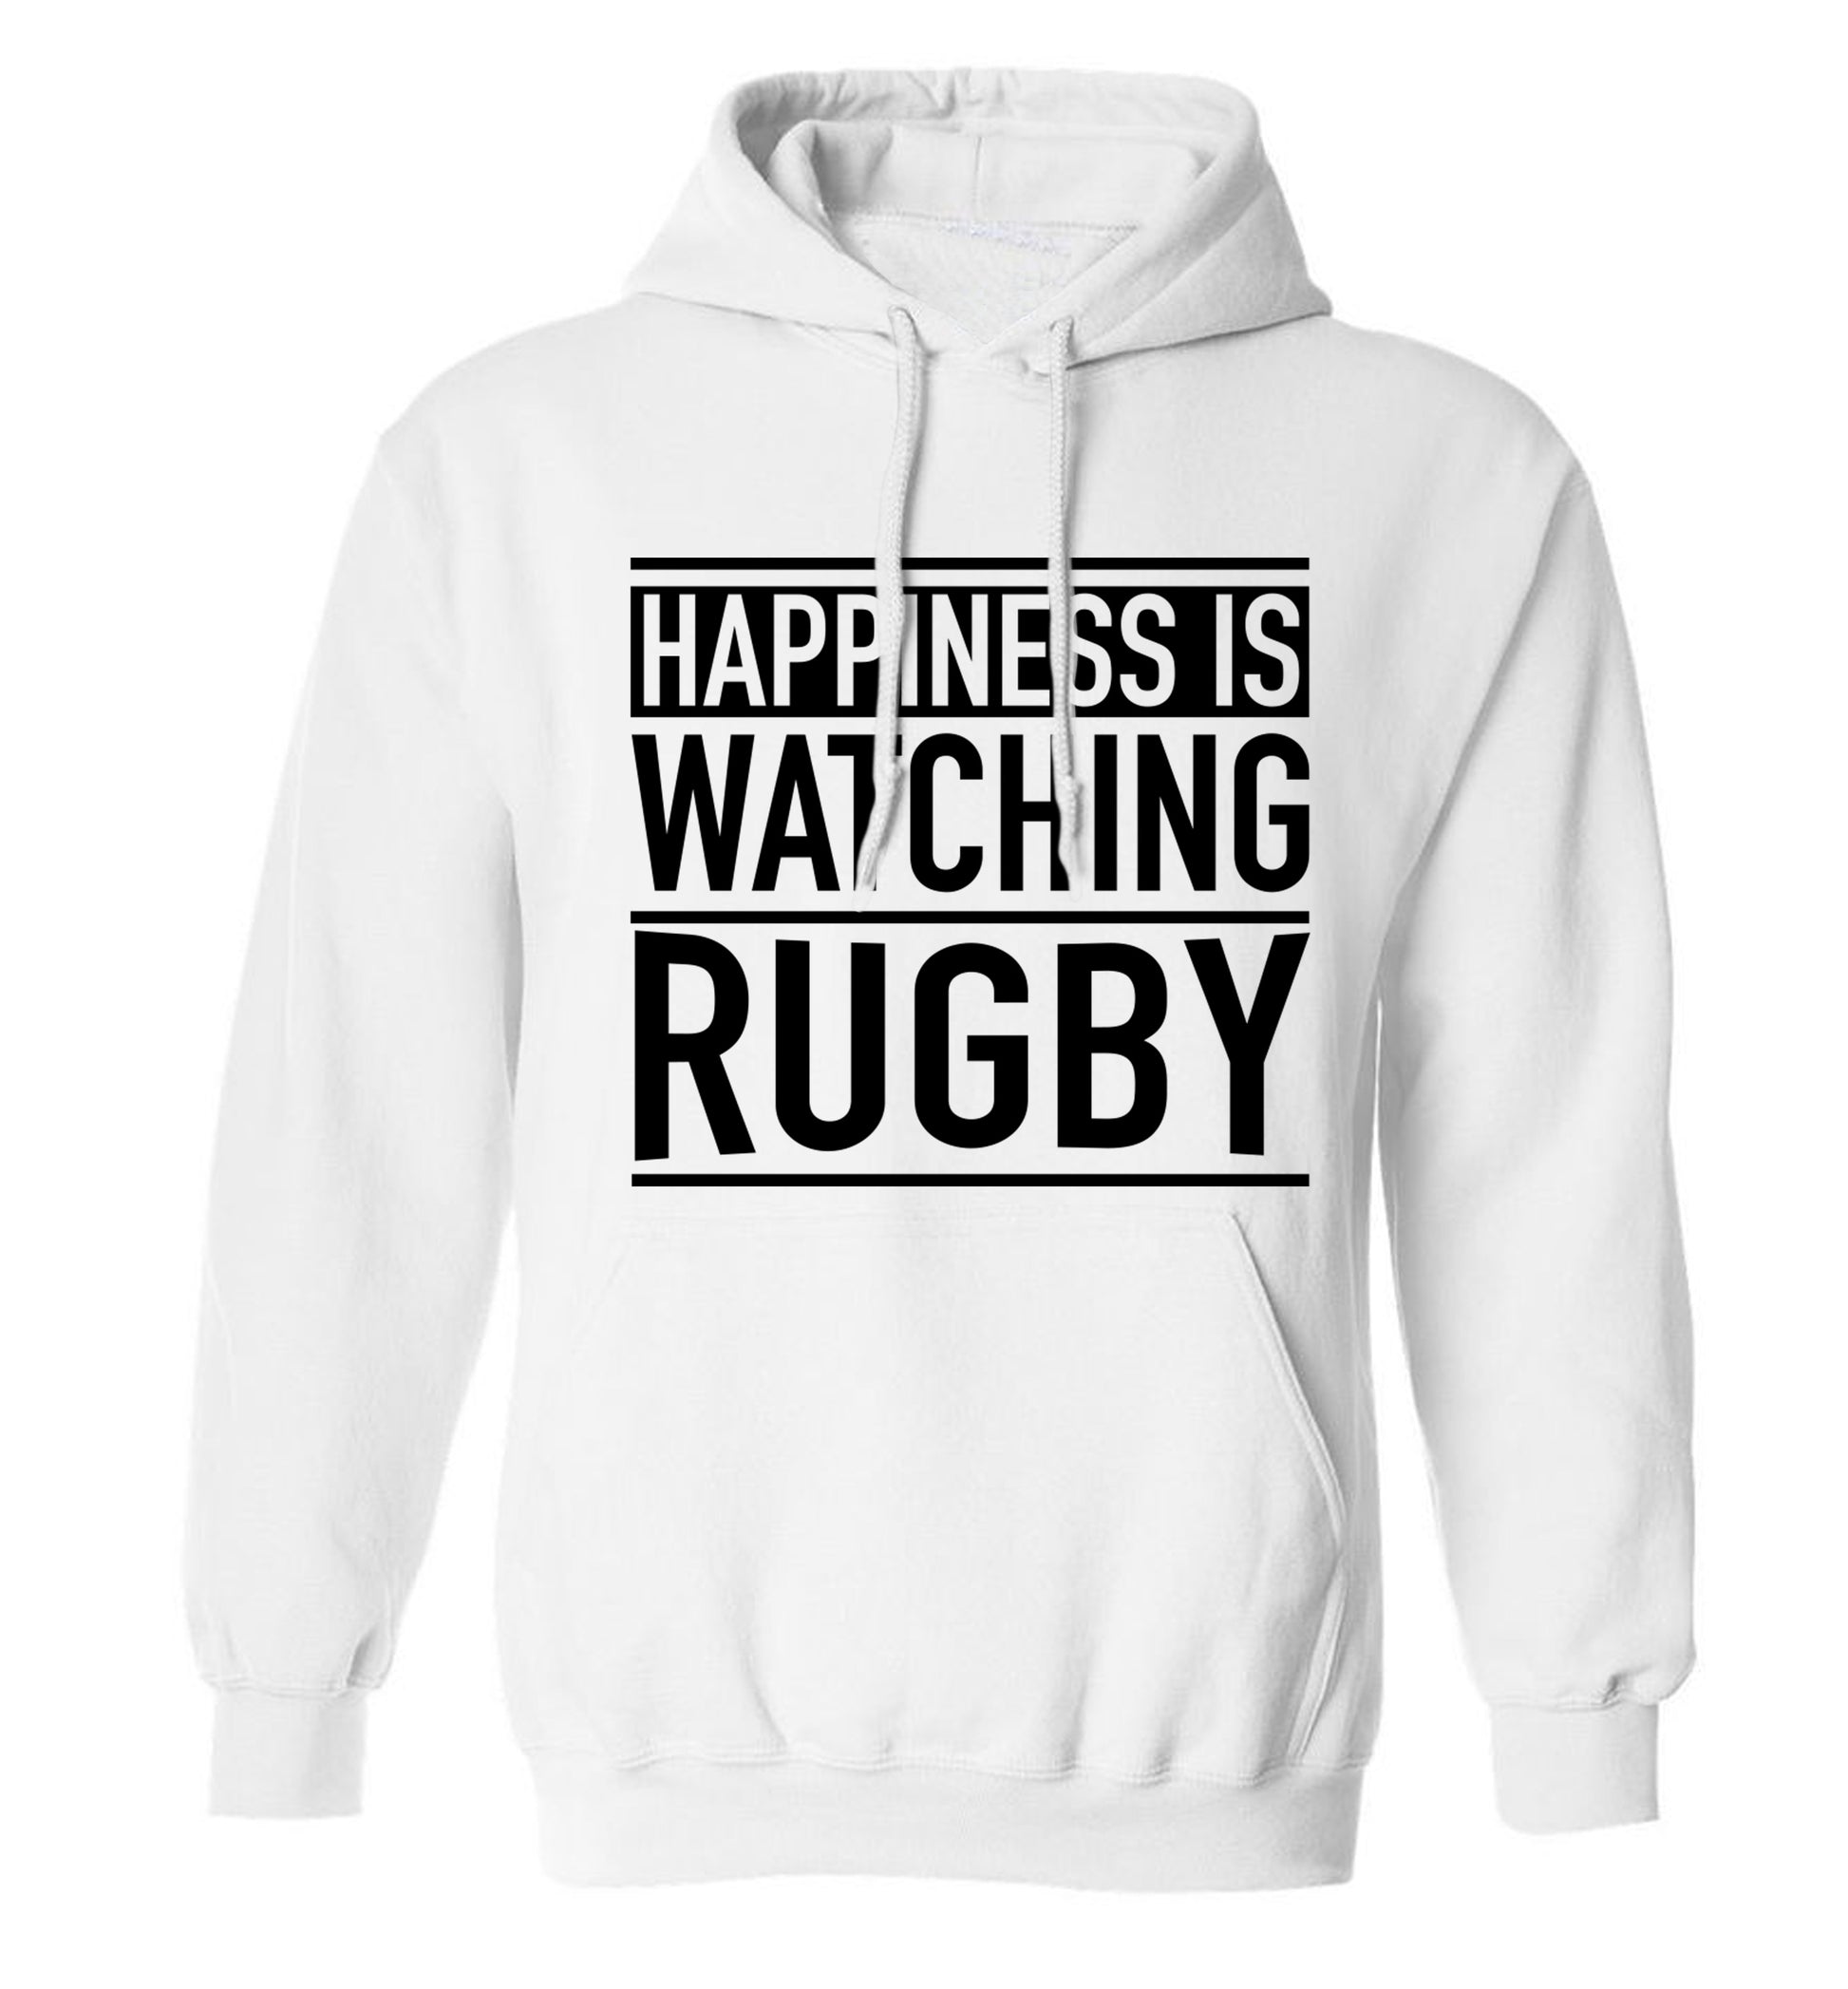 Happiness is watching rugby adults unisex white hoodie 2XL